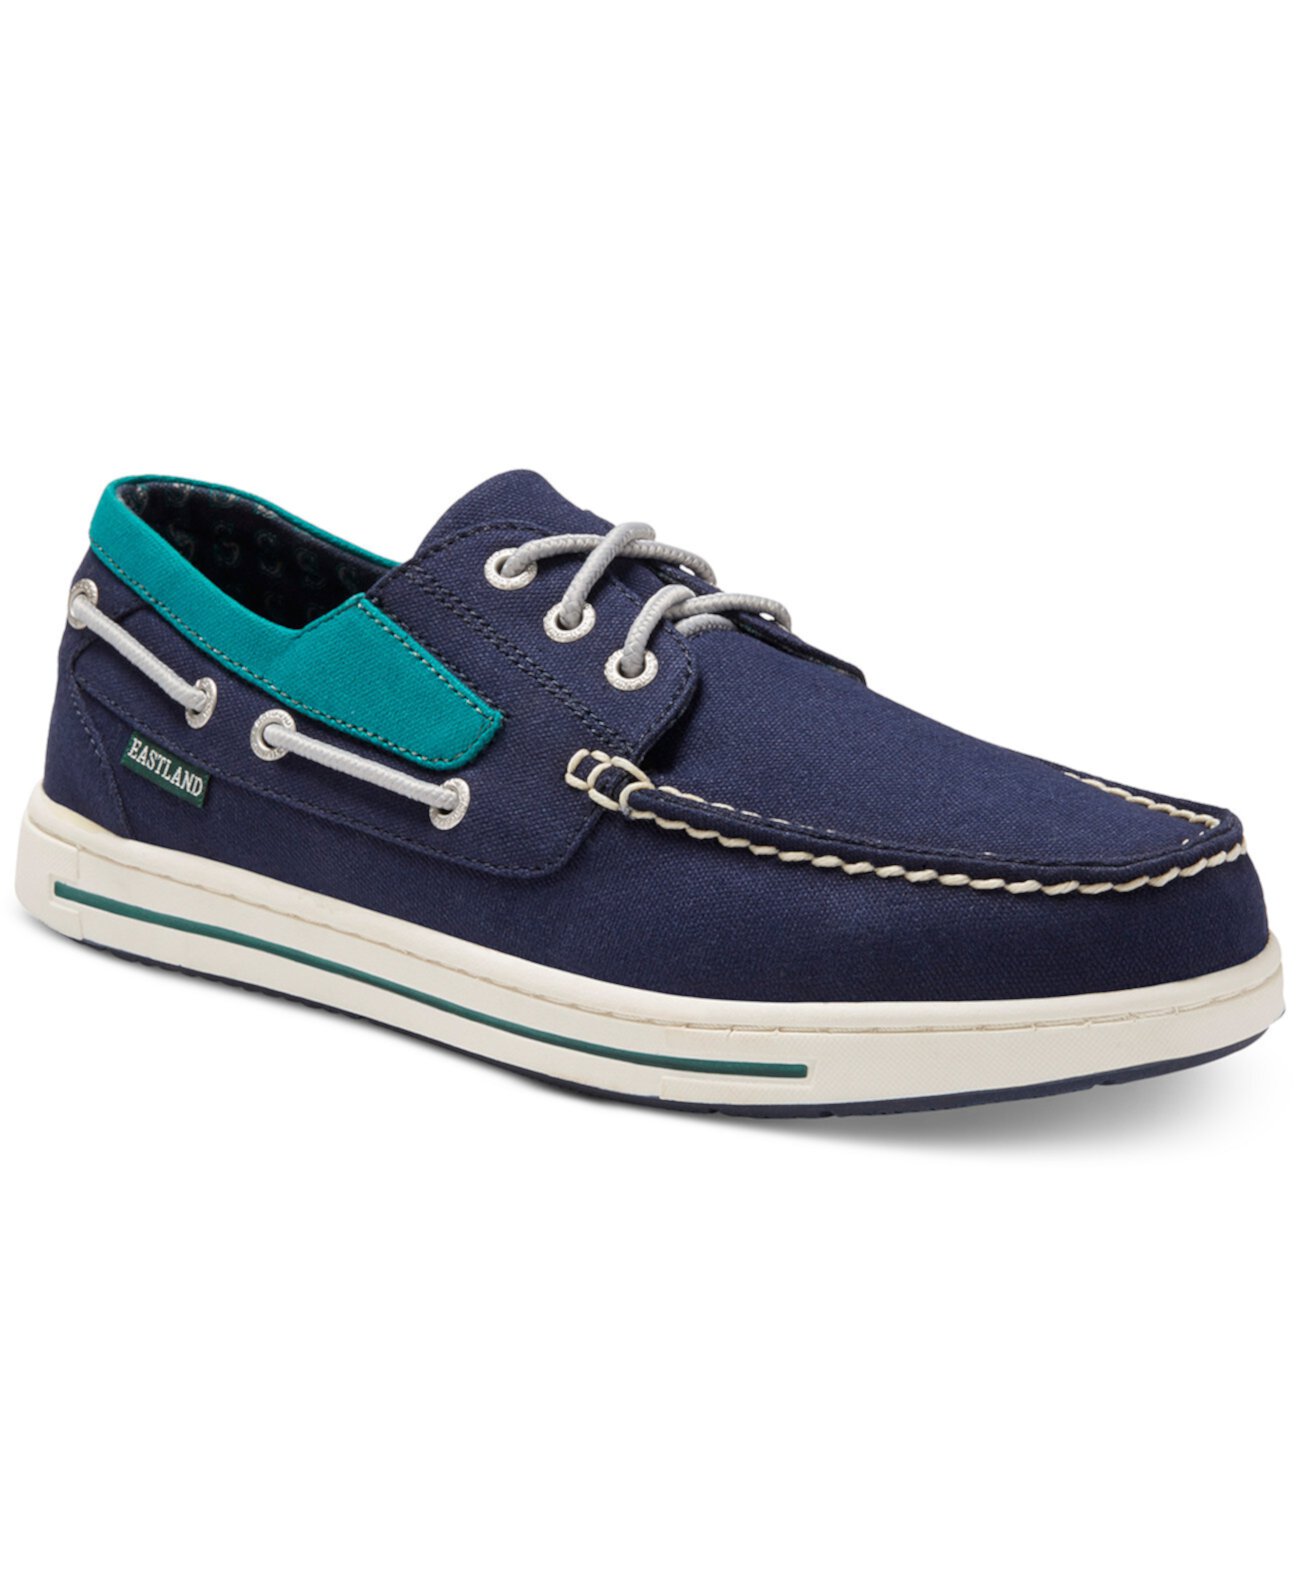 41 Best Boat shoes seattle for Girls